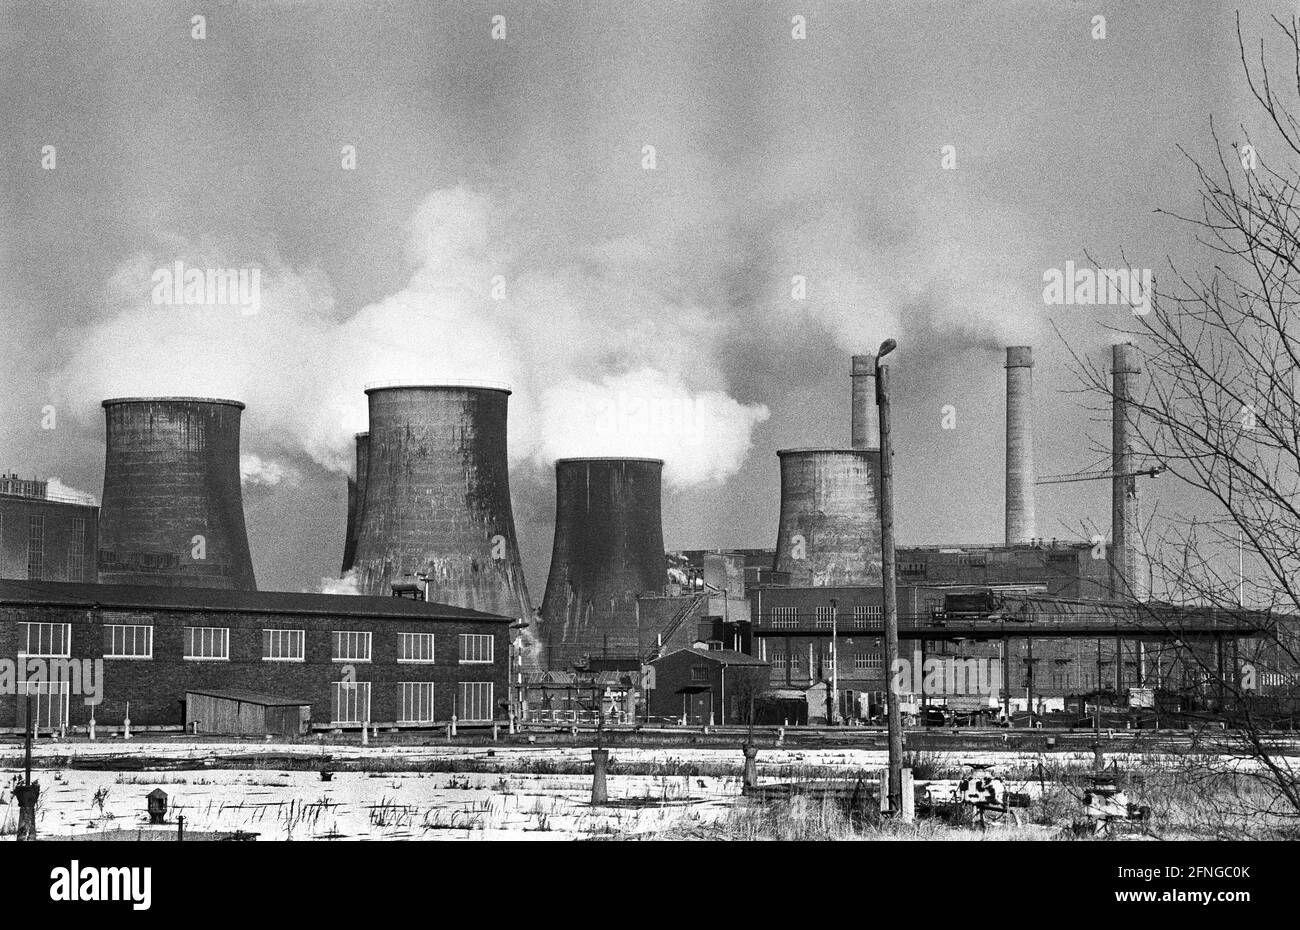 Germany, Espenhain, 07.01.1990. Archive-No.: 12-09-33 The Kombinat Espenhain (more precisely VEB Kombinat Espenhain) was a plant for the extraction and processing of brown coal. Photo: View of the plant [automated translation] Stock Photo